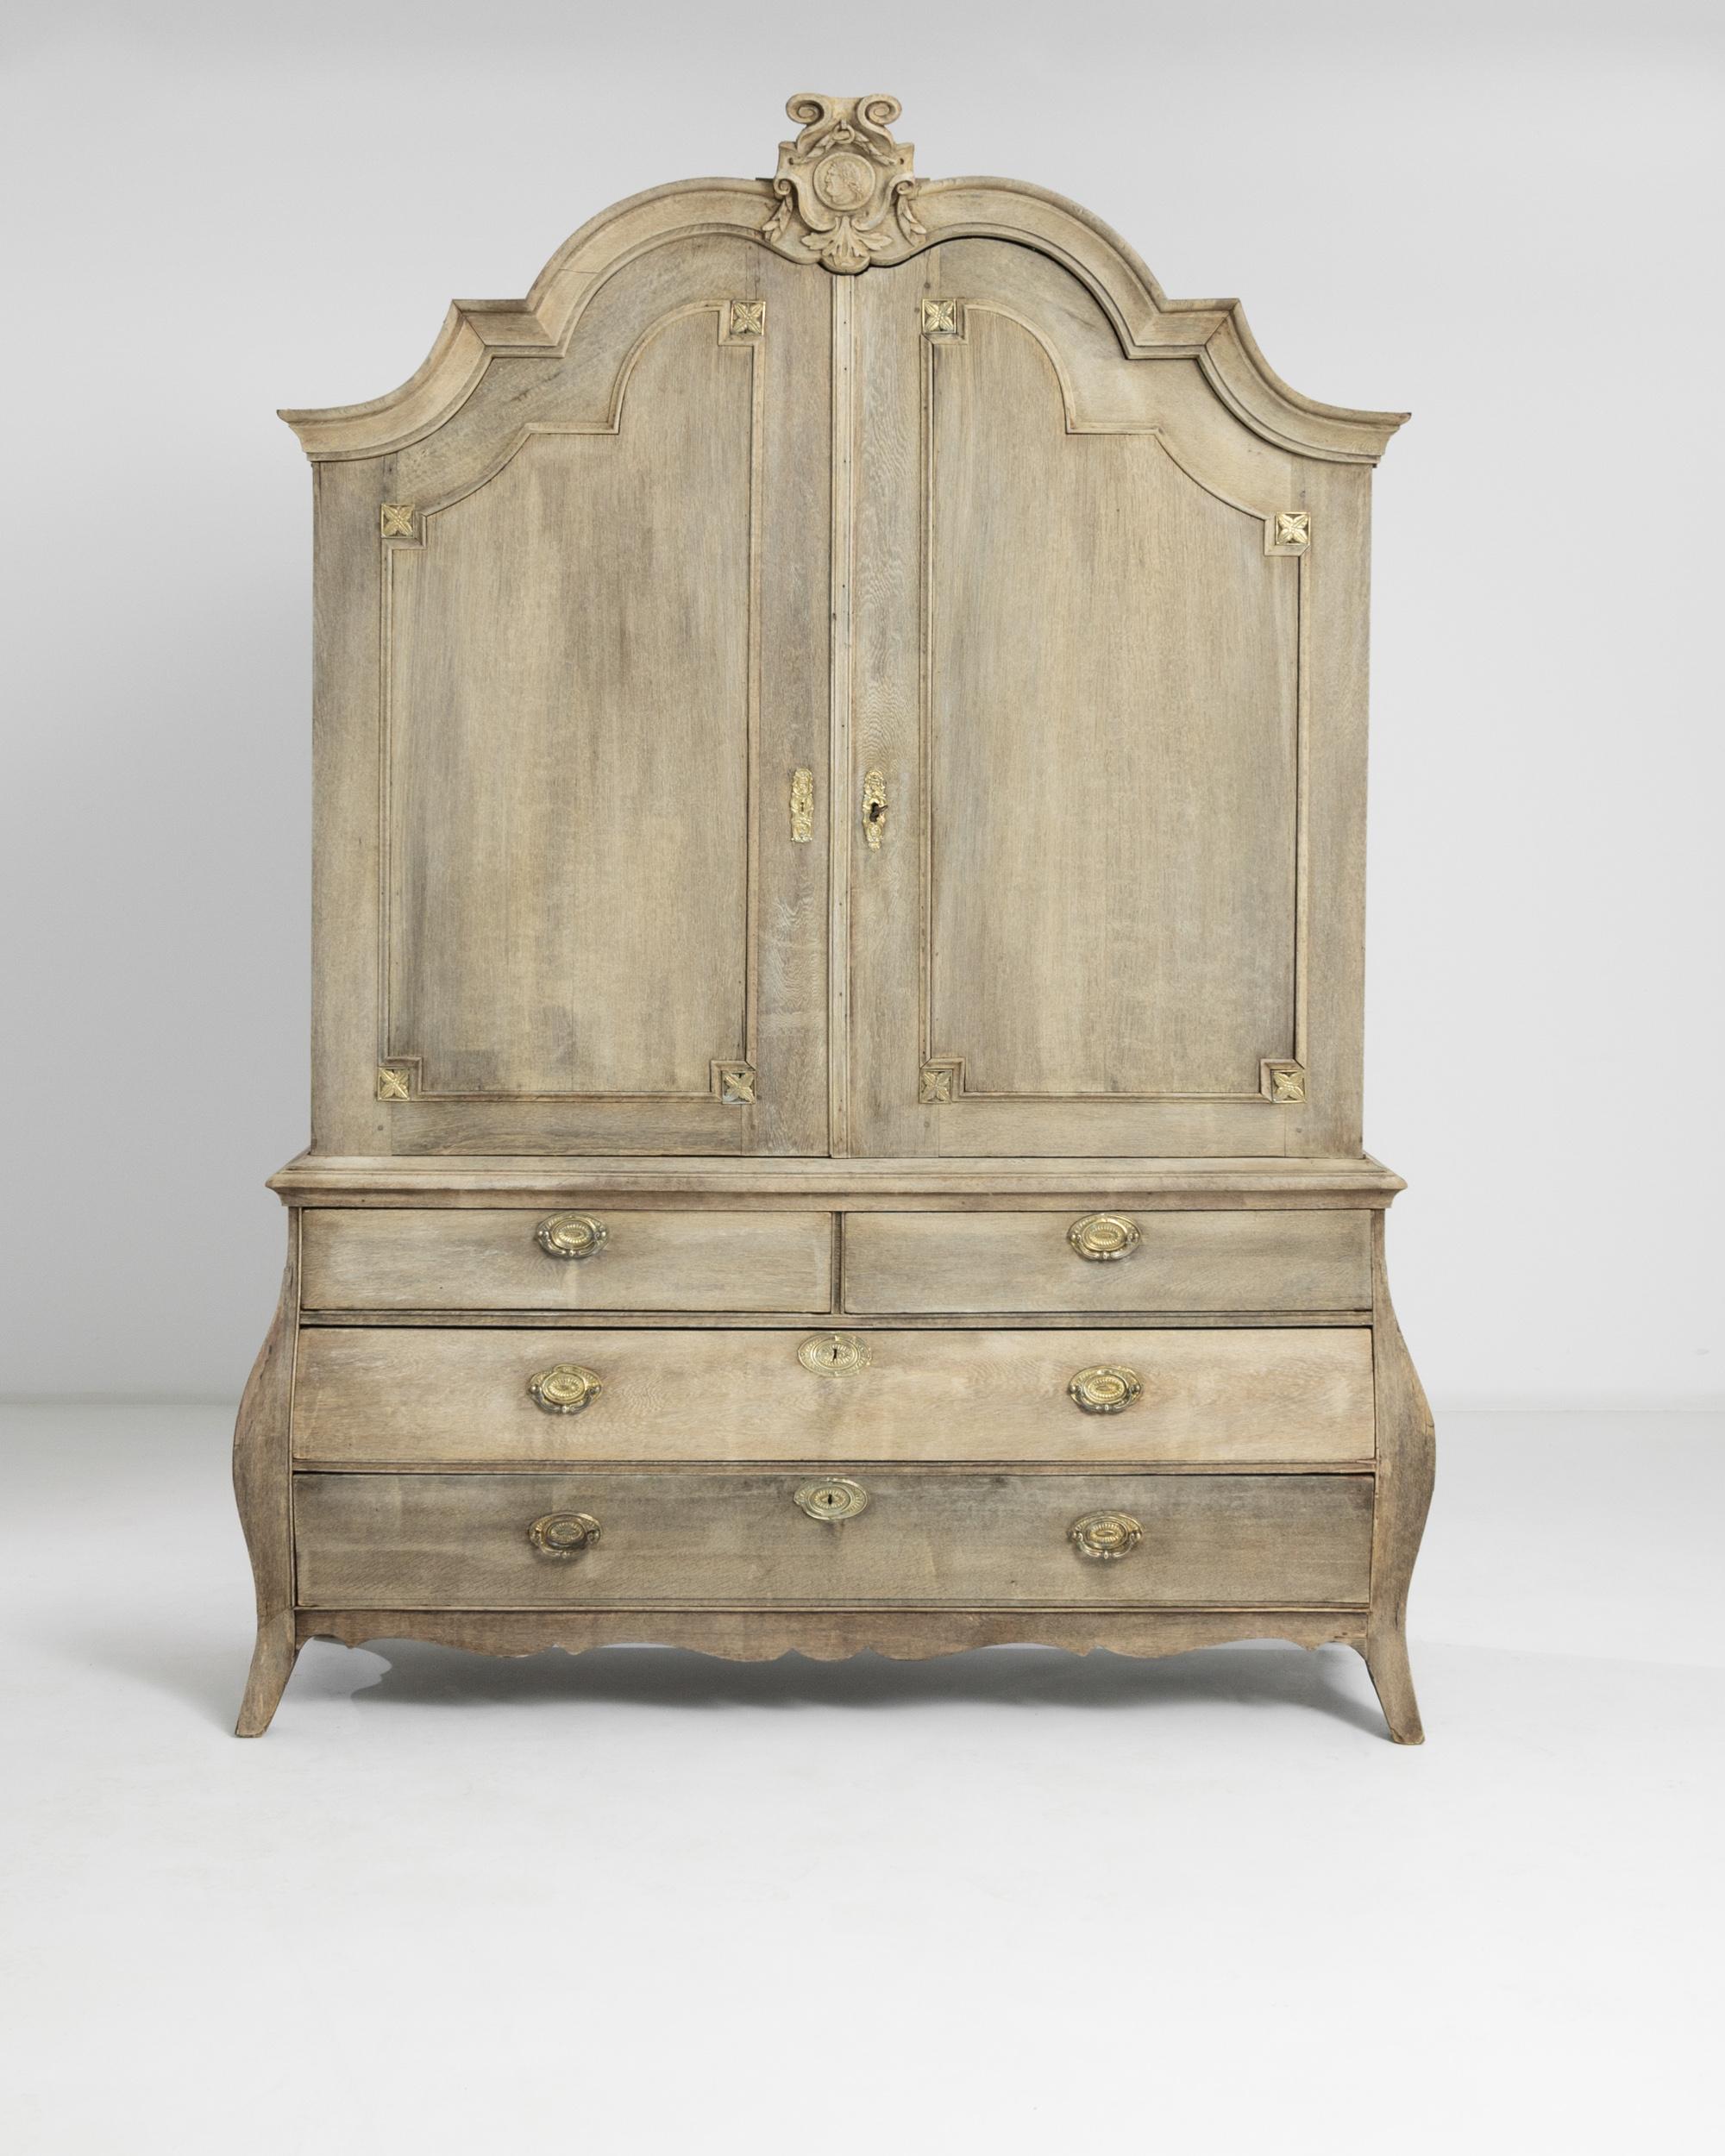 A large Dutch bleached oak cabinet. Seemingly untouched by time, this well preserved cabinet offers ample storage space across numerous shelves and drawers. Stamped metal keyhole and drawer handle ornaments, in addition to a Roman figurehead carved